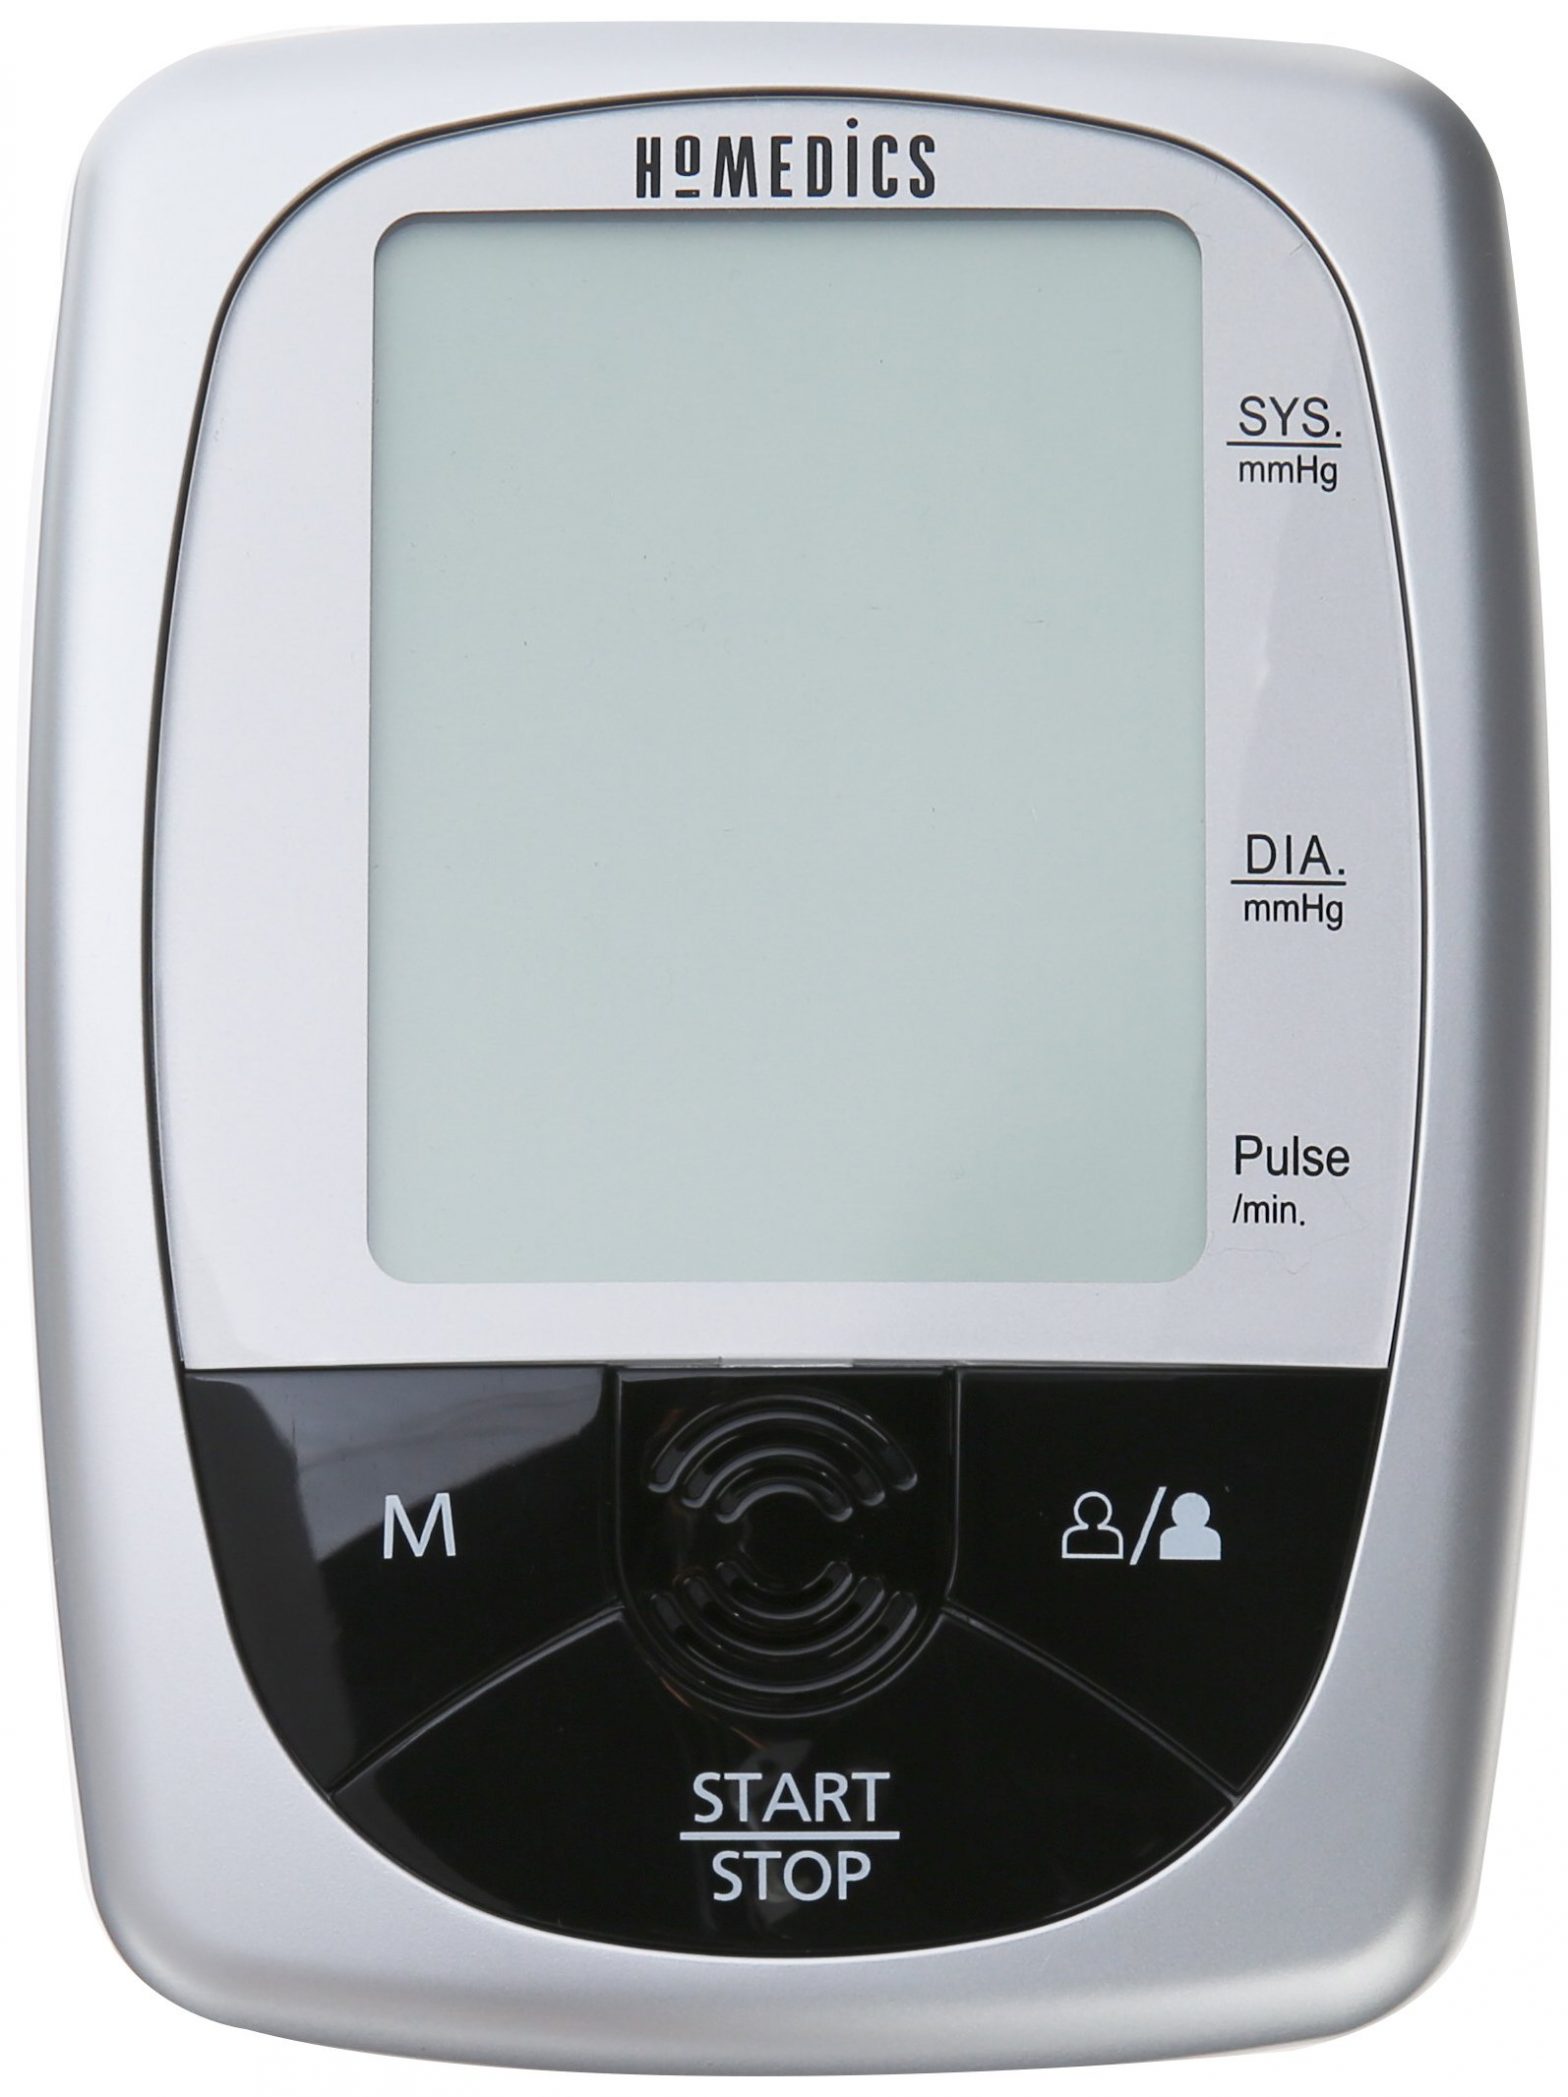 Homedics BPA-260 Automatic Blood Pressure Monitor with Voice Assist User Manual